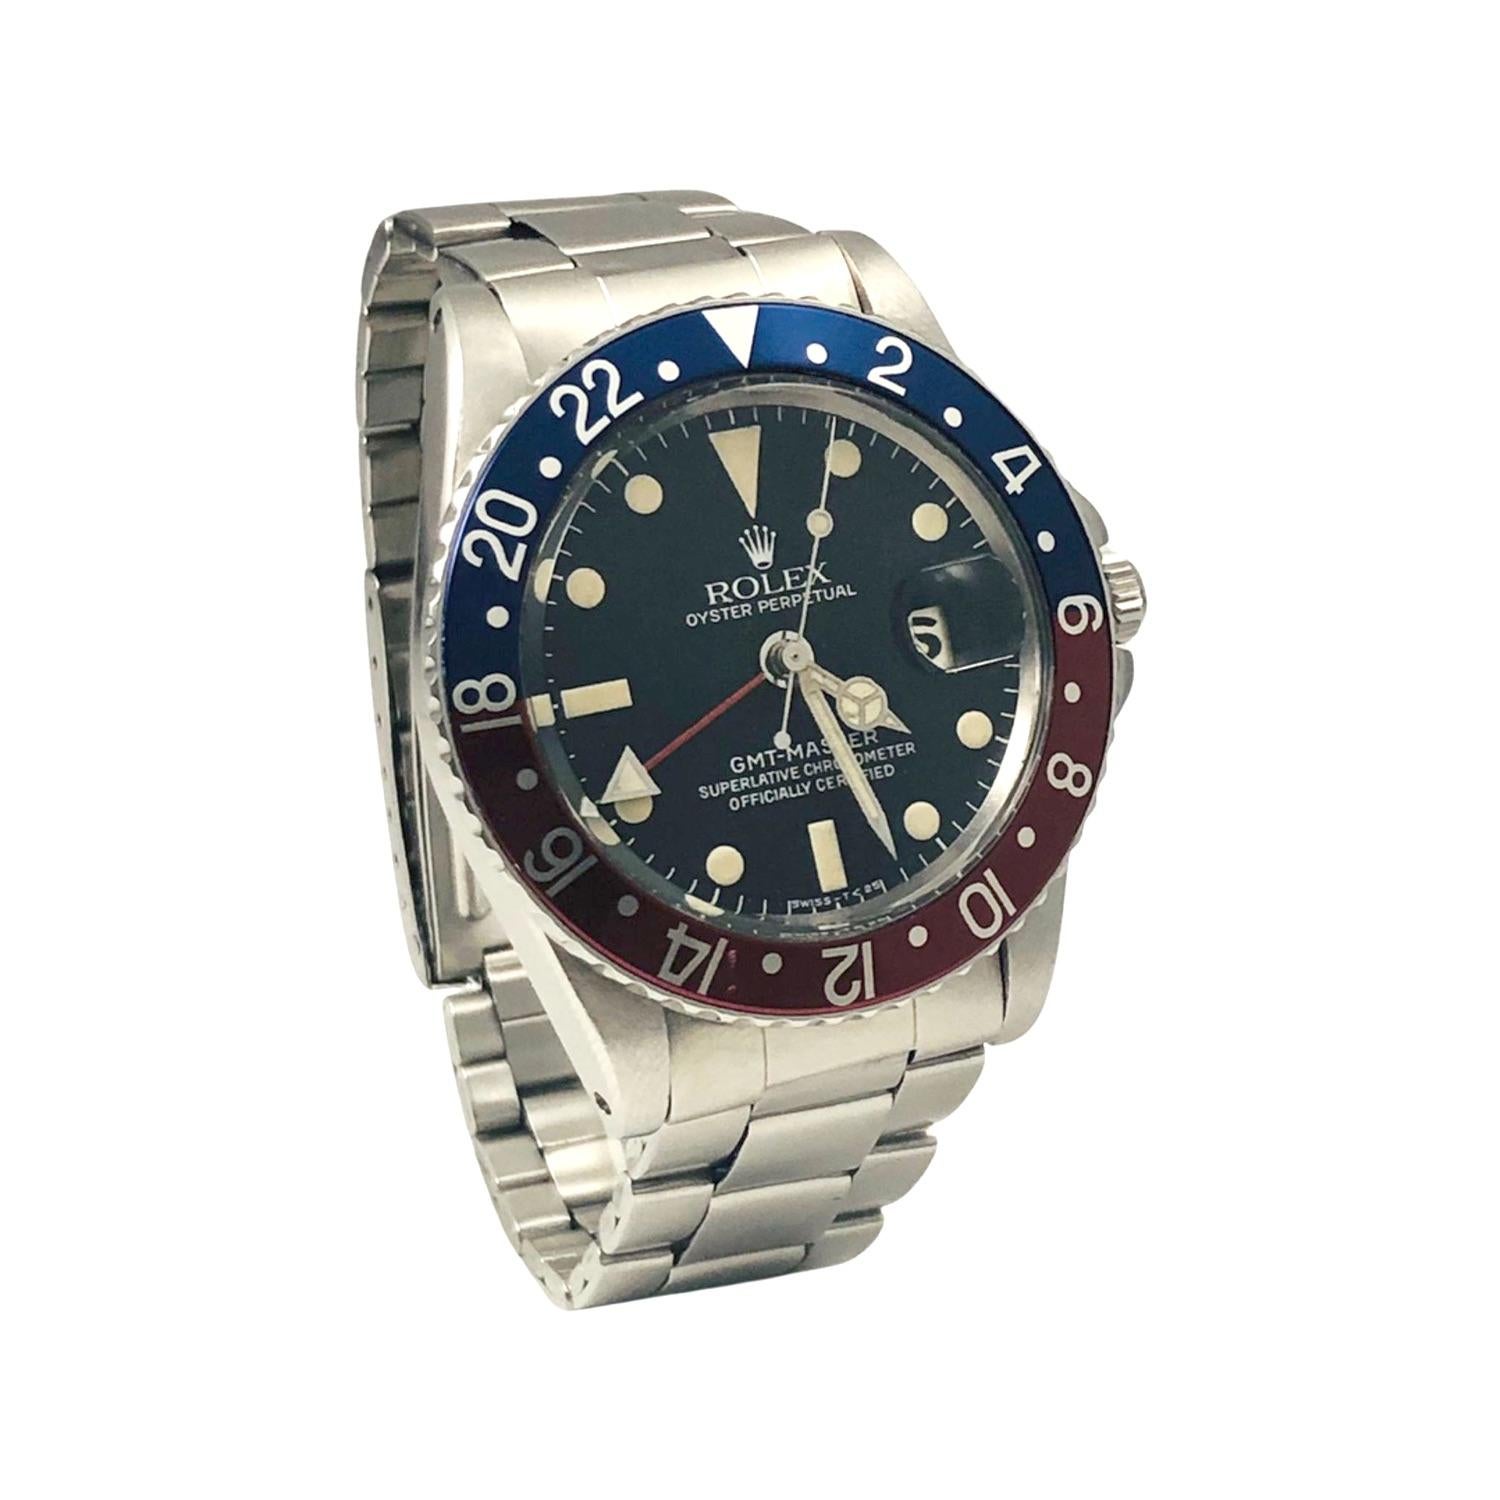 DESCRIPTION

Brand: Rolex

Model Name: GMT Master

Model Number: 1675

Movement: Automatic

Case Size: 40 mm

Case Material: Stainless Steel

Dial: Black Dial/Luminous Hour Markers

Bezel: Pepsi

Hour Markers: Hour Stick

Bracelet: Stainless